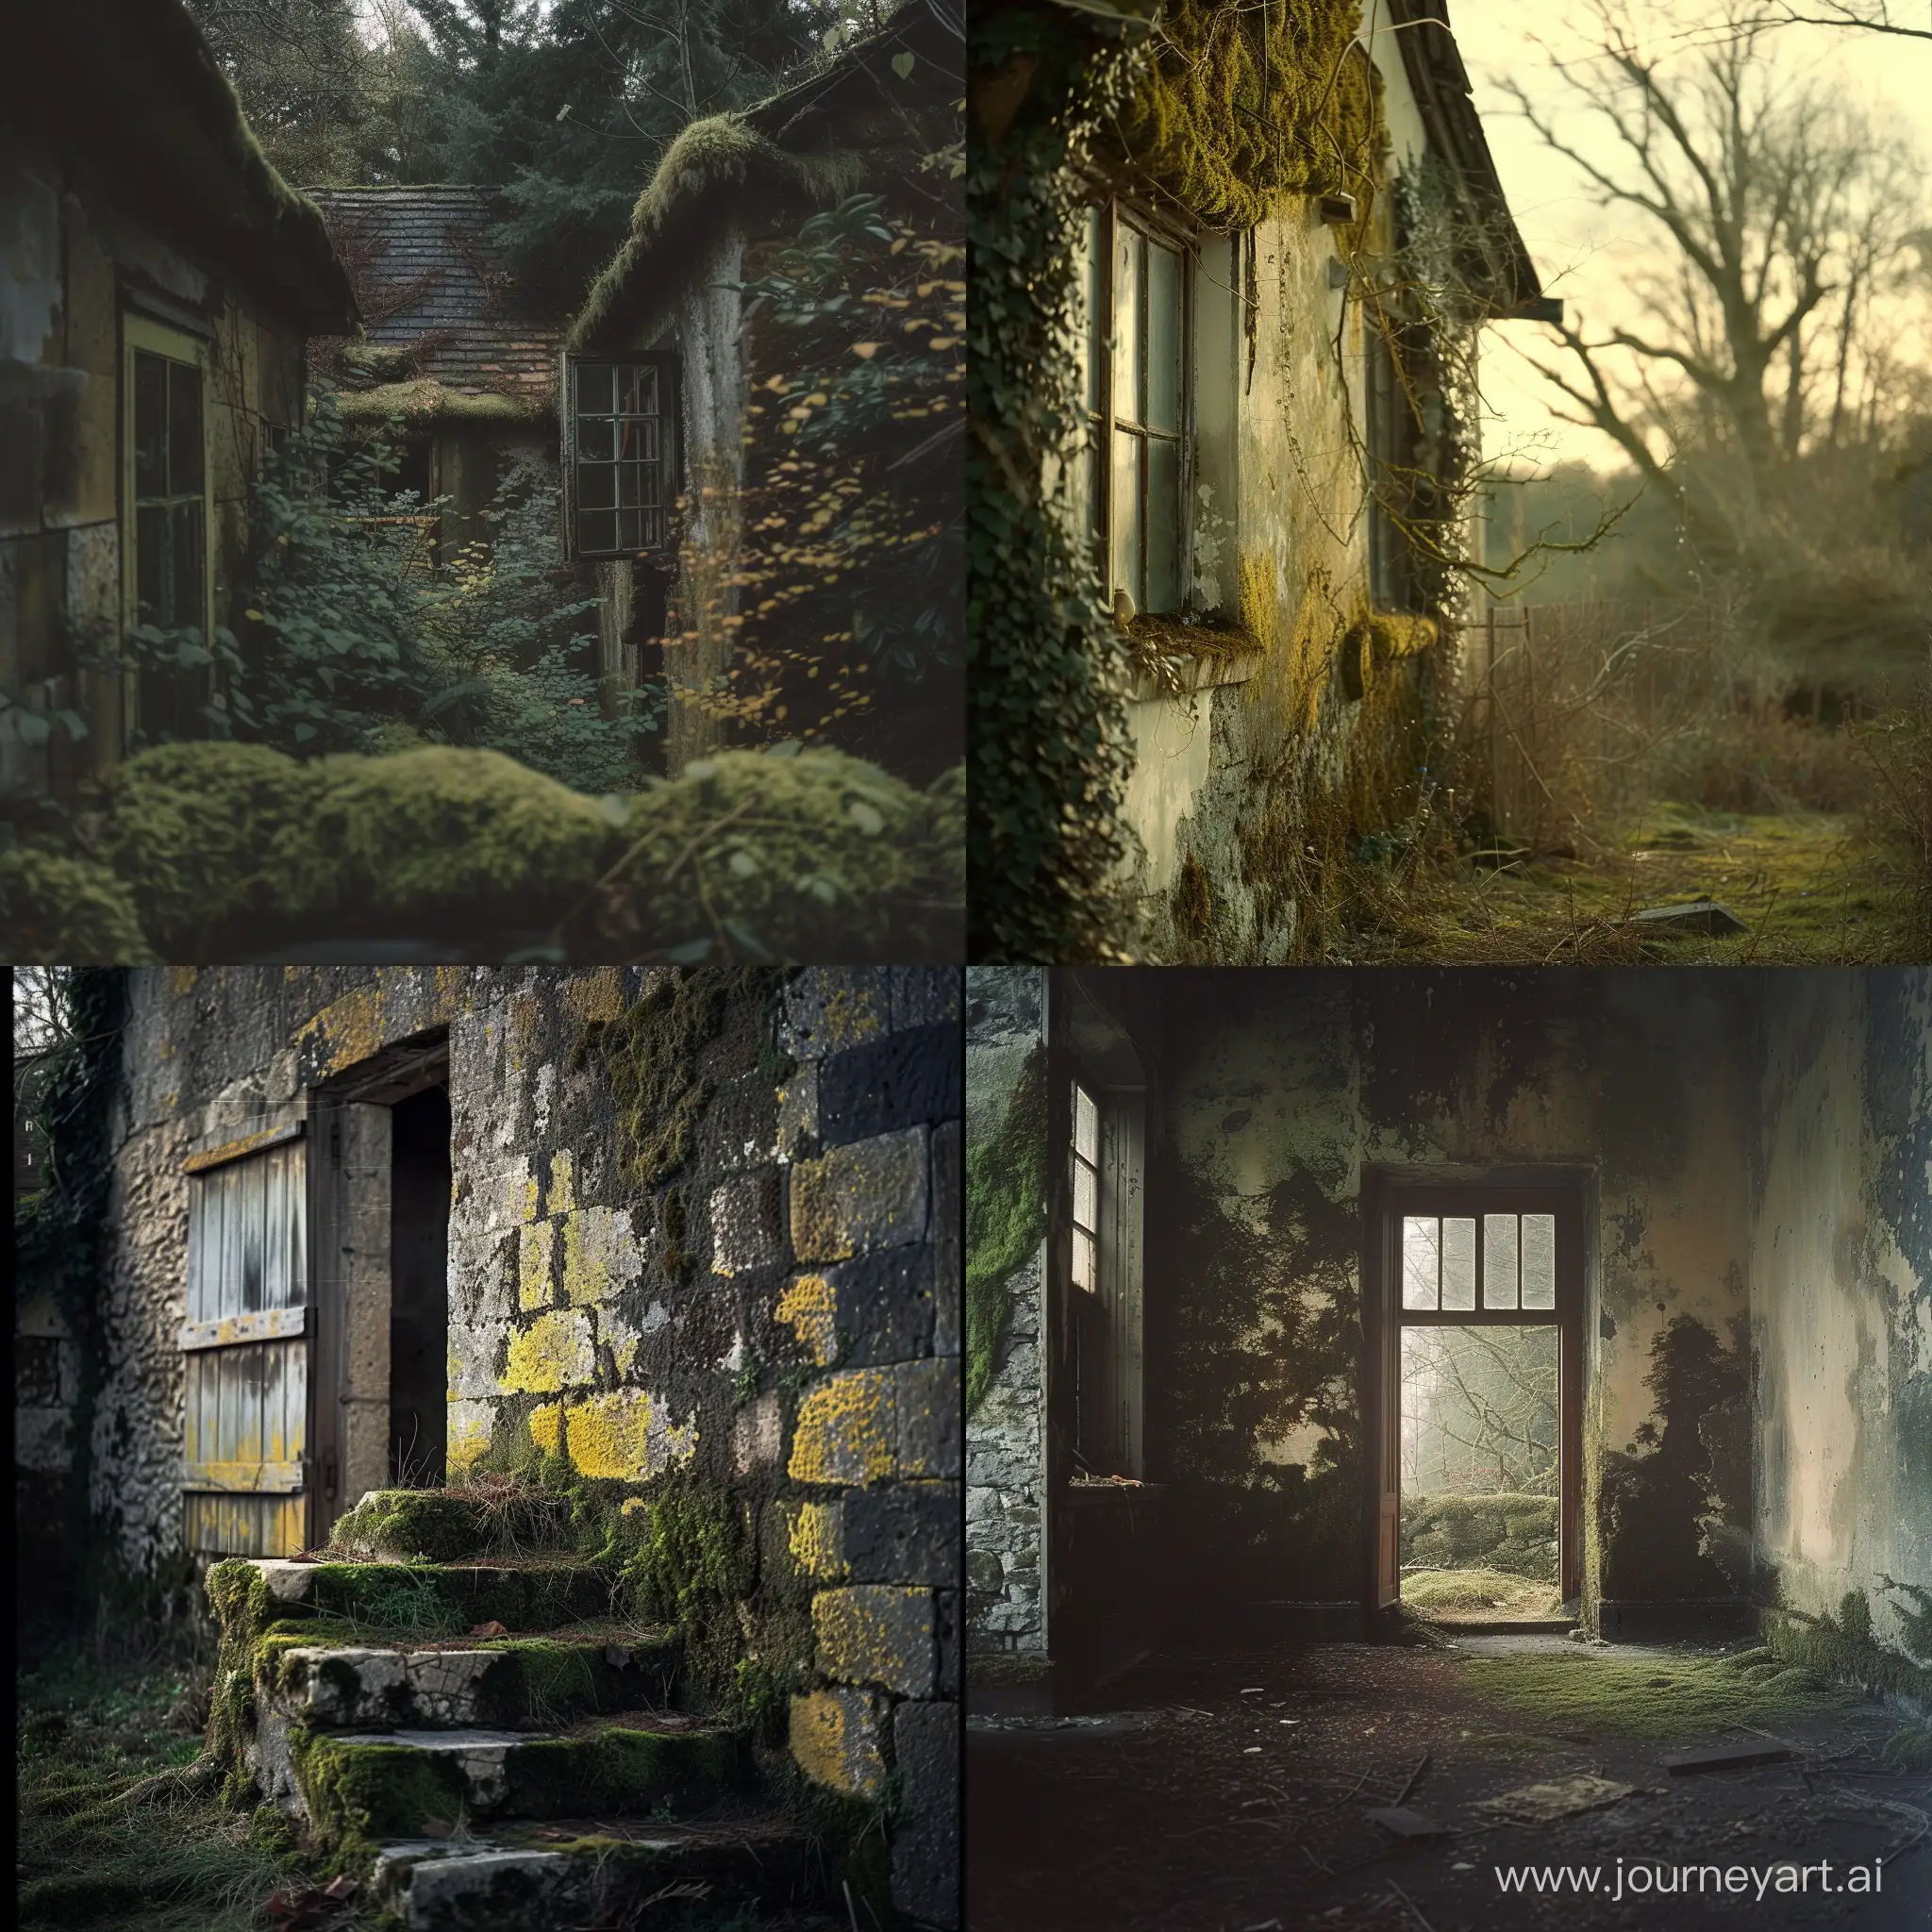 old country house, moss on walls, day light, 58mm helios lens, cinema grain effect